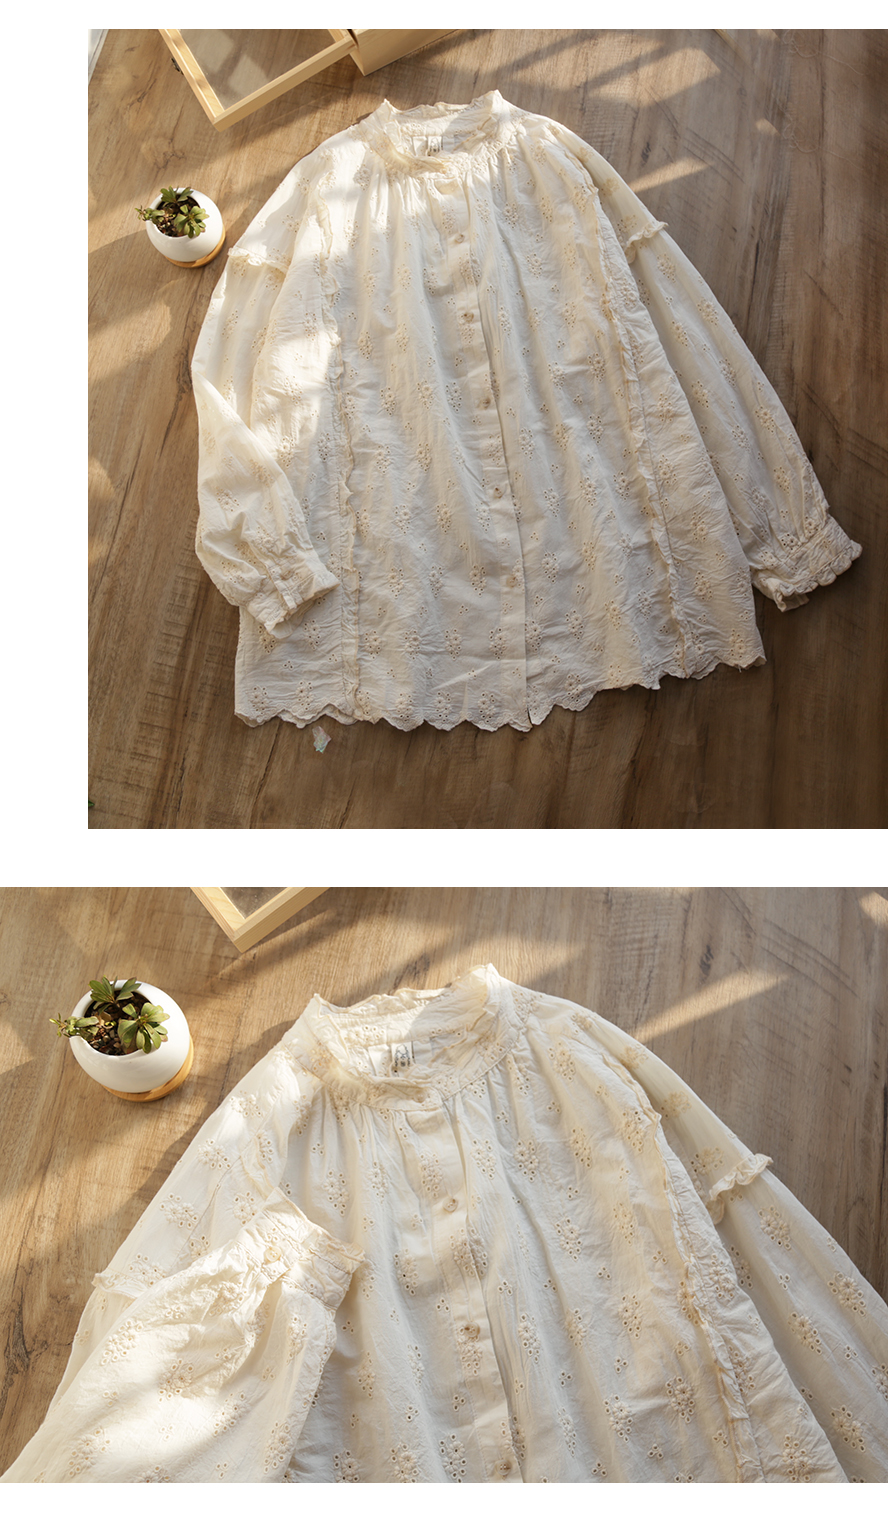 Boutique hollow out embroidery ruffles 100% cotton stand collar Japanese style  shirt blouse 2020 Autumn